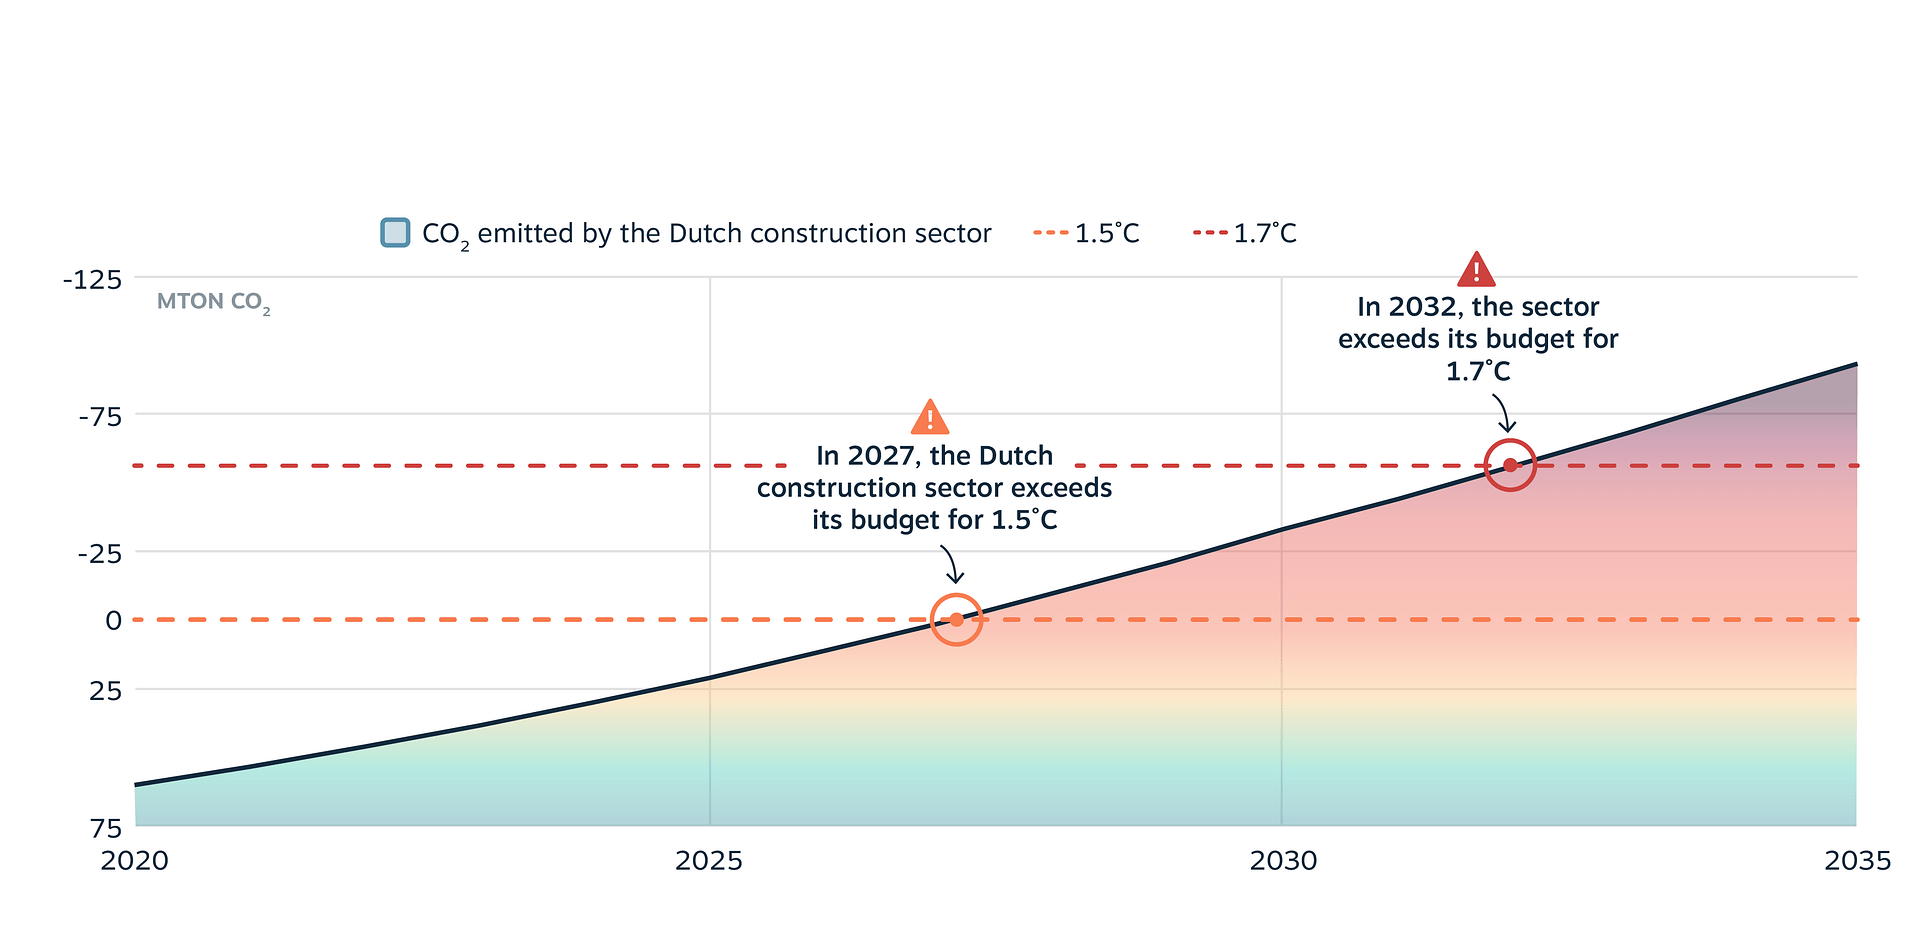 Caption: In 2027, the Dutch housing construction sector will exceed its CO2 budget to remain below 1.5C global warming.